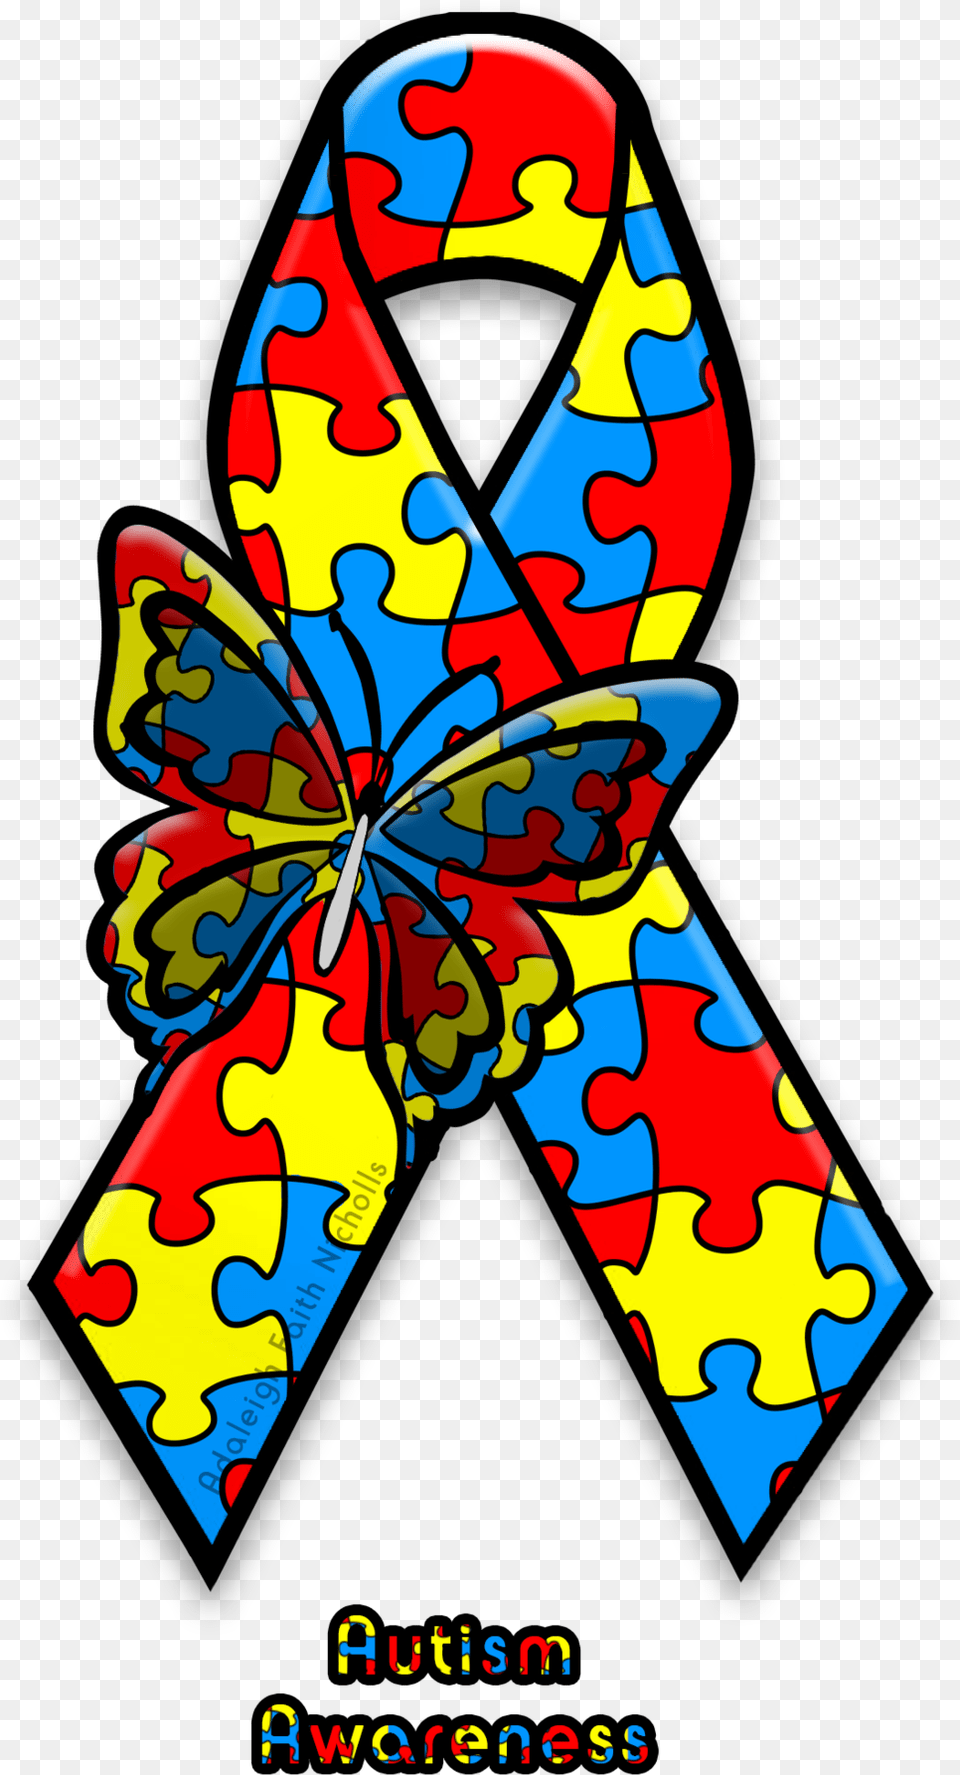 Autism Awareness Ribbon By Adaleighfaith Autism Awareness Ribbon, Accessories, Formal Wear, Tie Free Png Download